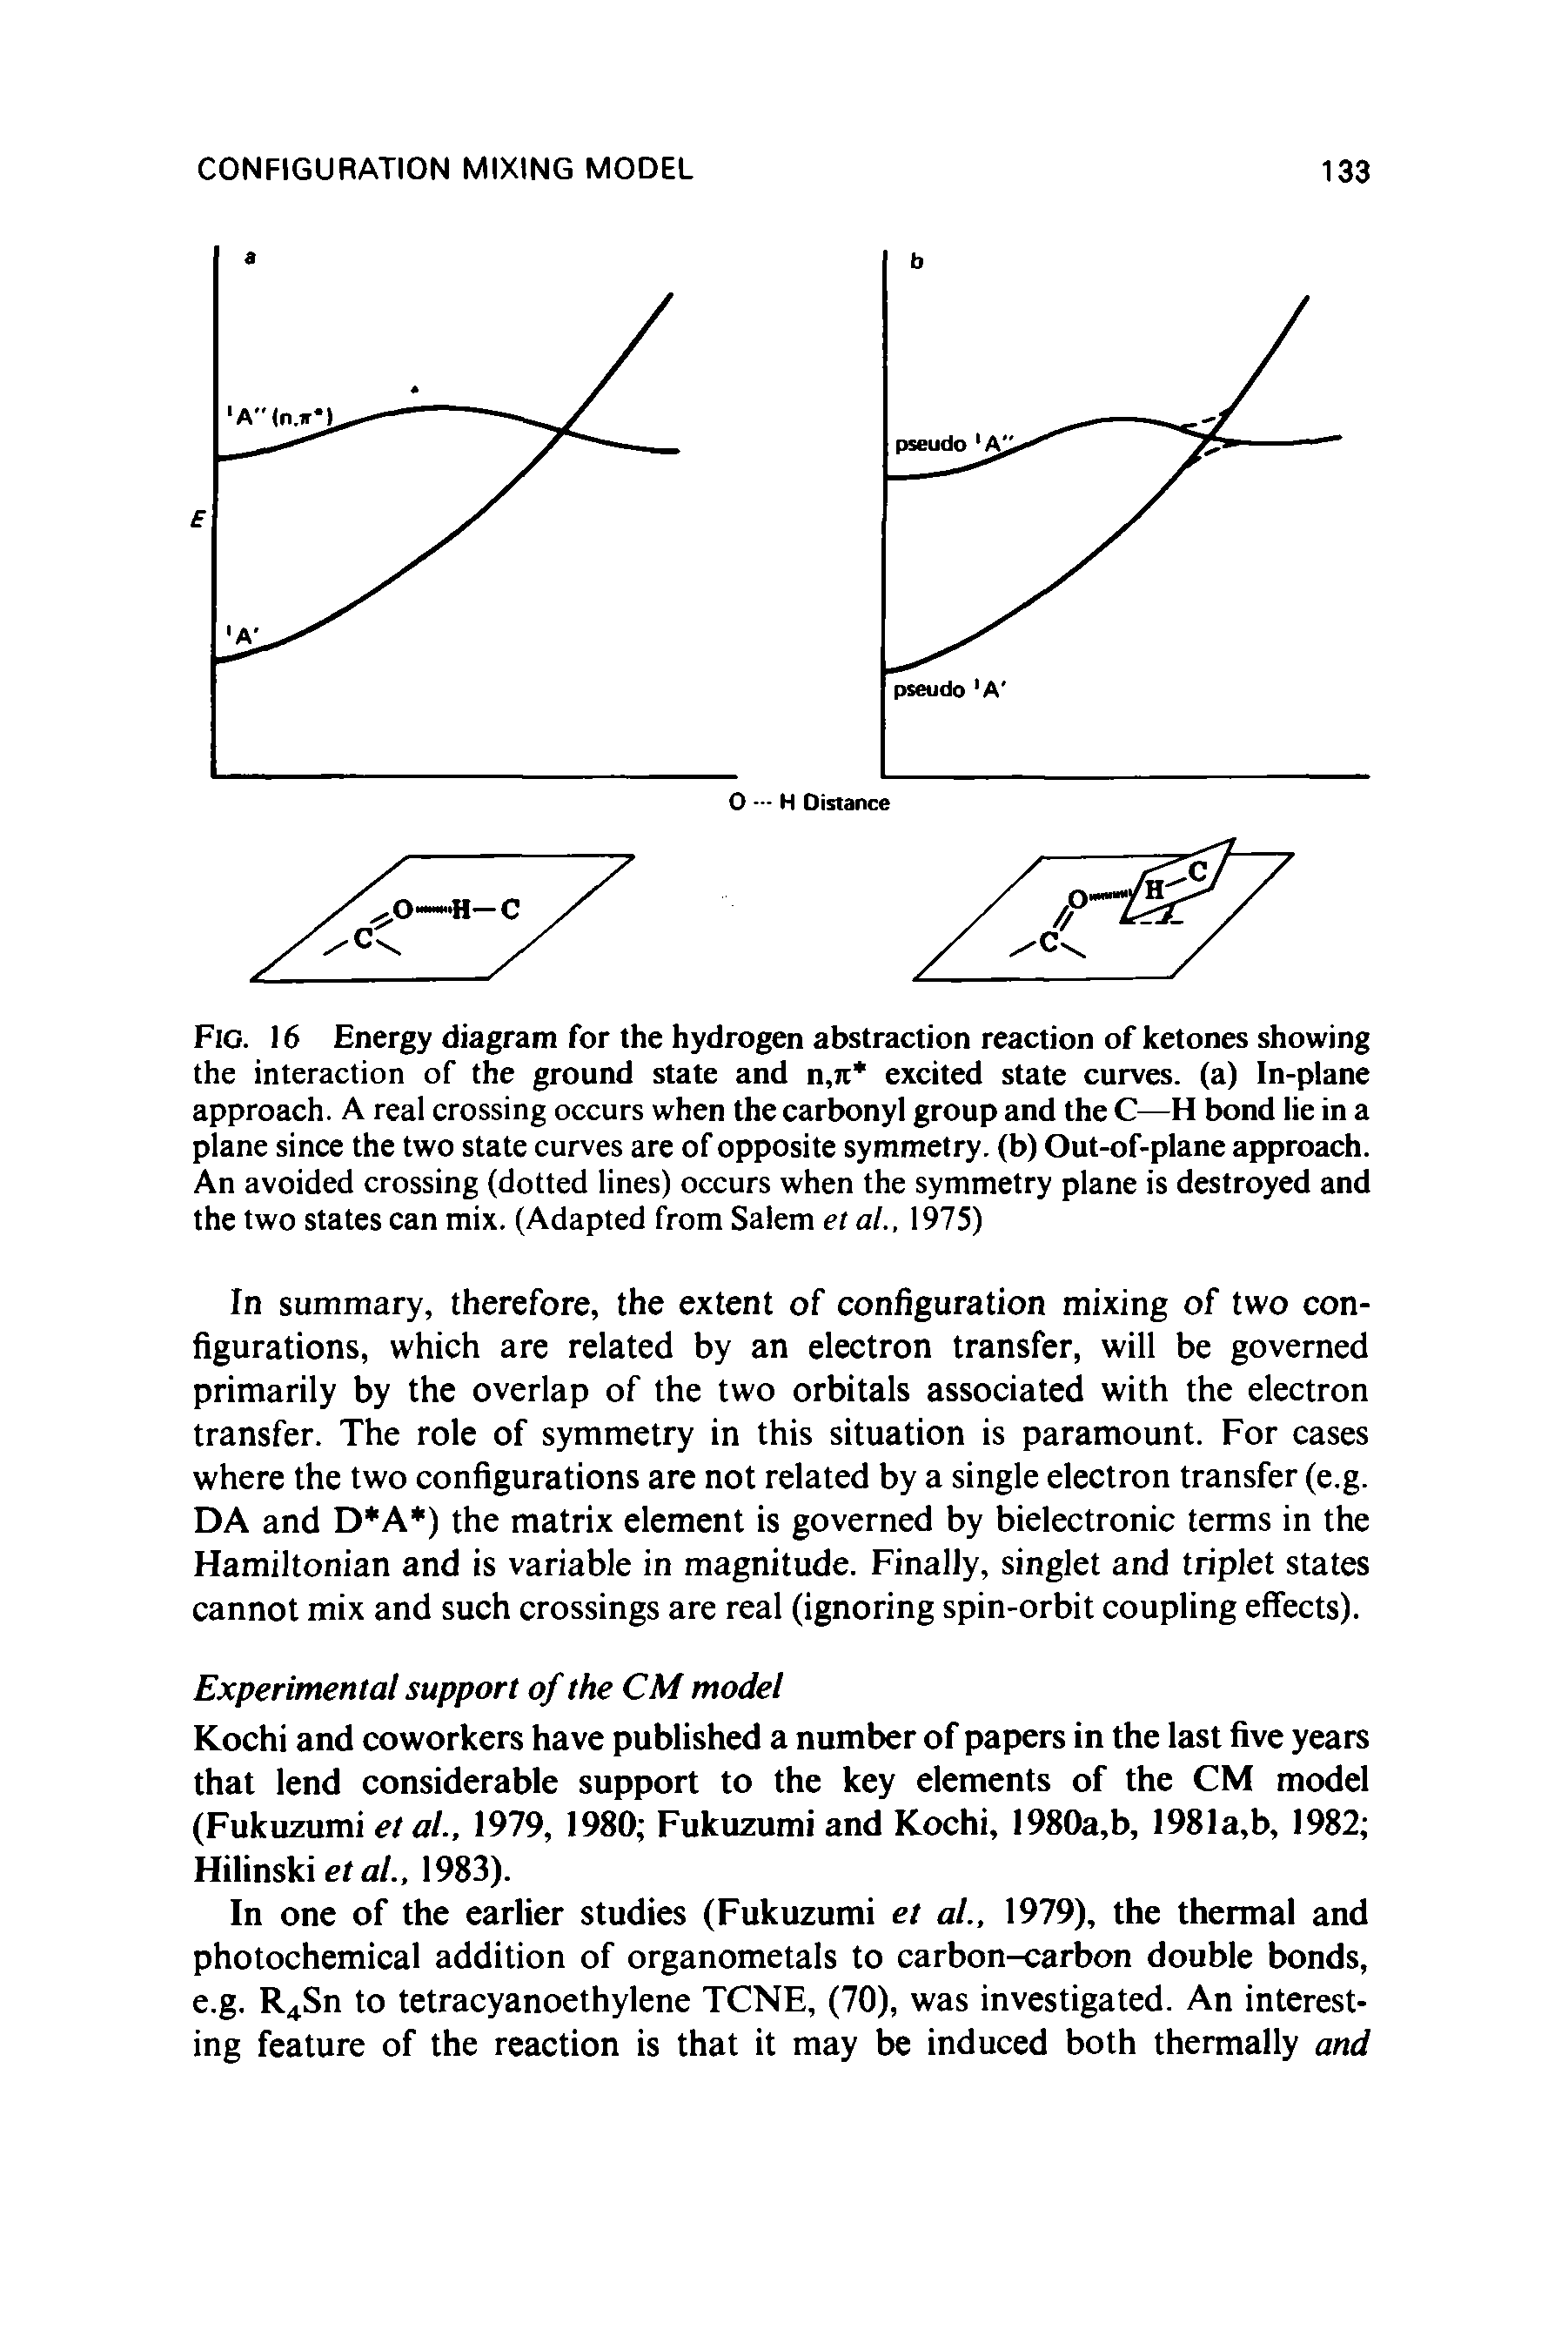 Fig. 16 Energy diagram for the hydrogen abstraction reaction of ketones showing the interaction of the ground state and n,rc excited state curves, (a) In-plane approach. A real crossing occurs when the carbonyl group and the C—H bond lie in a plane since the two state curves are of opposite symmetry, (b) Out-of-plane approach. An avoided crossing (dotted lines) occurs when the symmetry plane is destroyed and the two states can mix. (Adapted from Salem et al., 1975)...